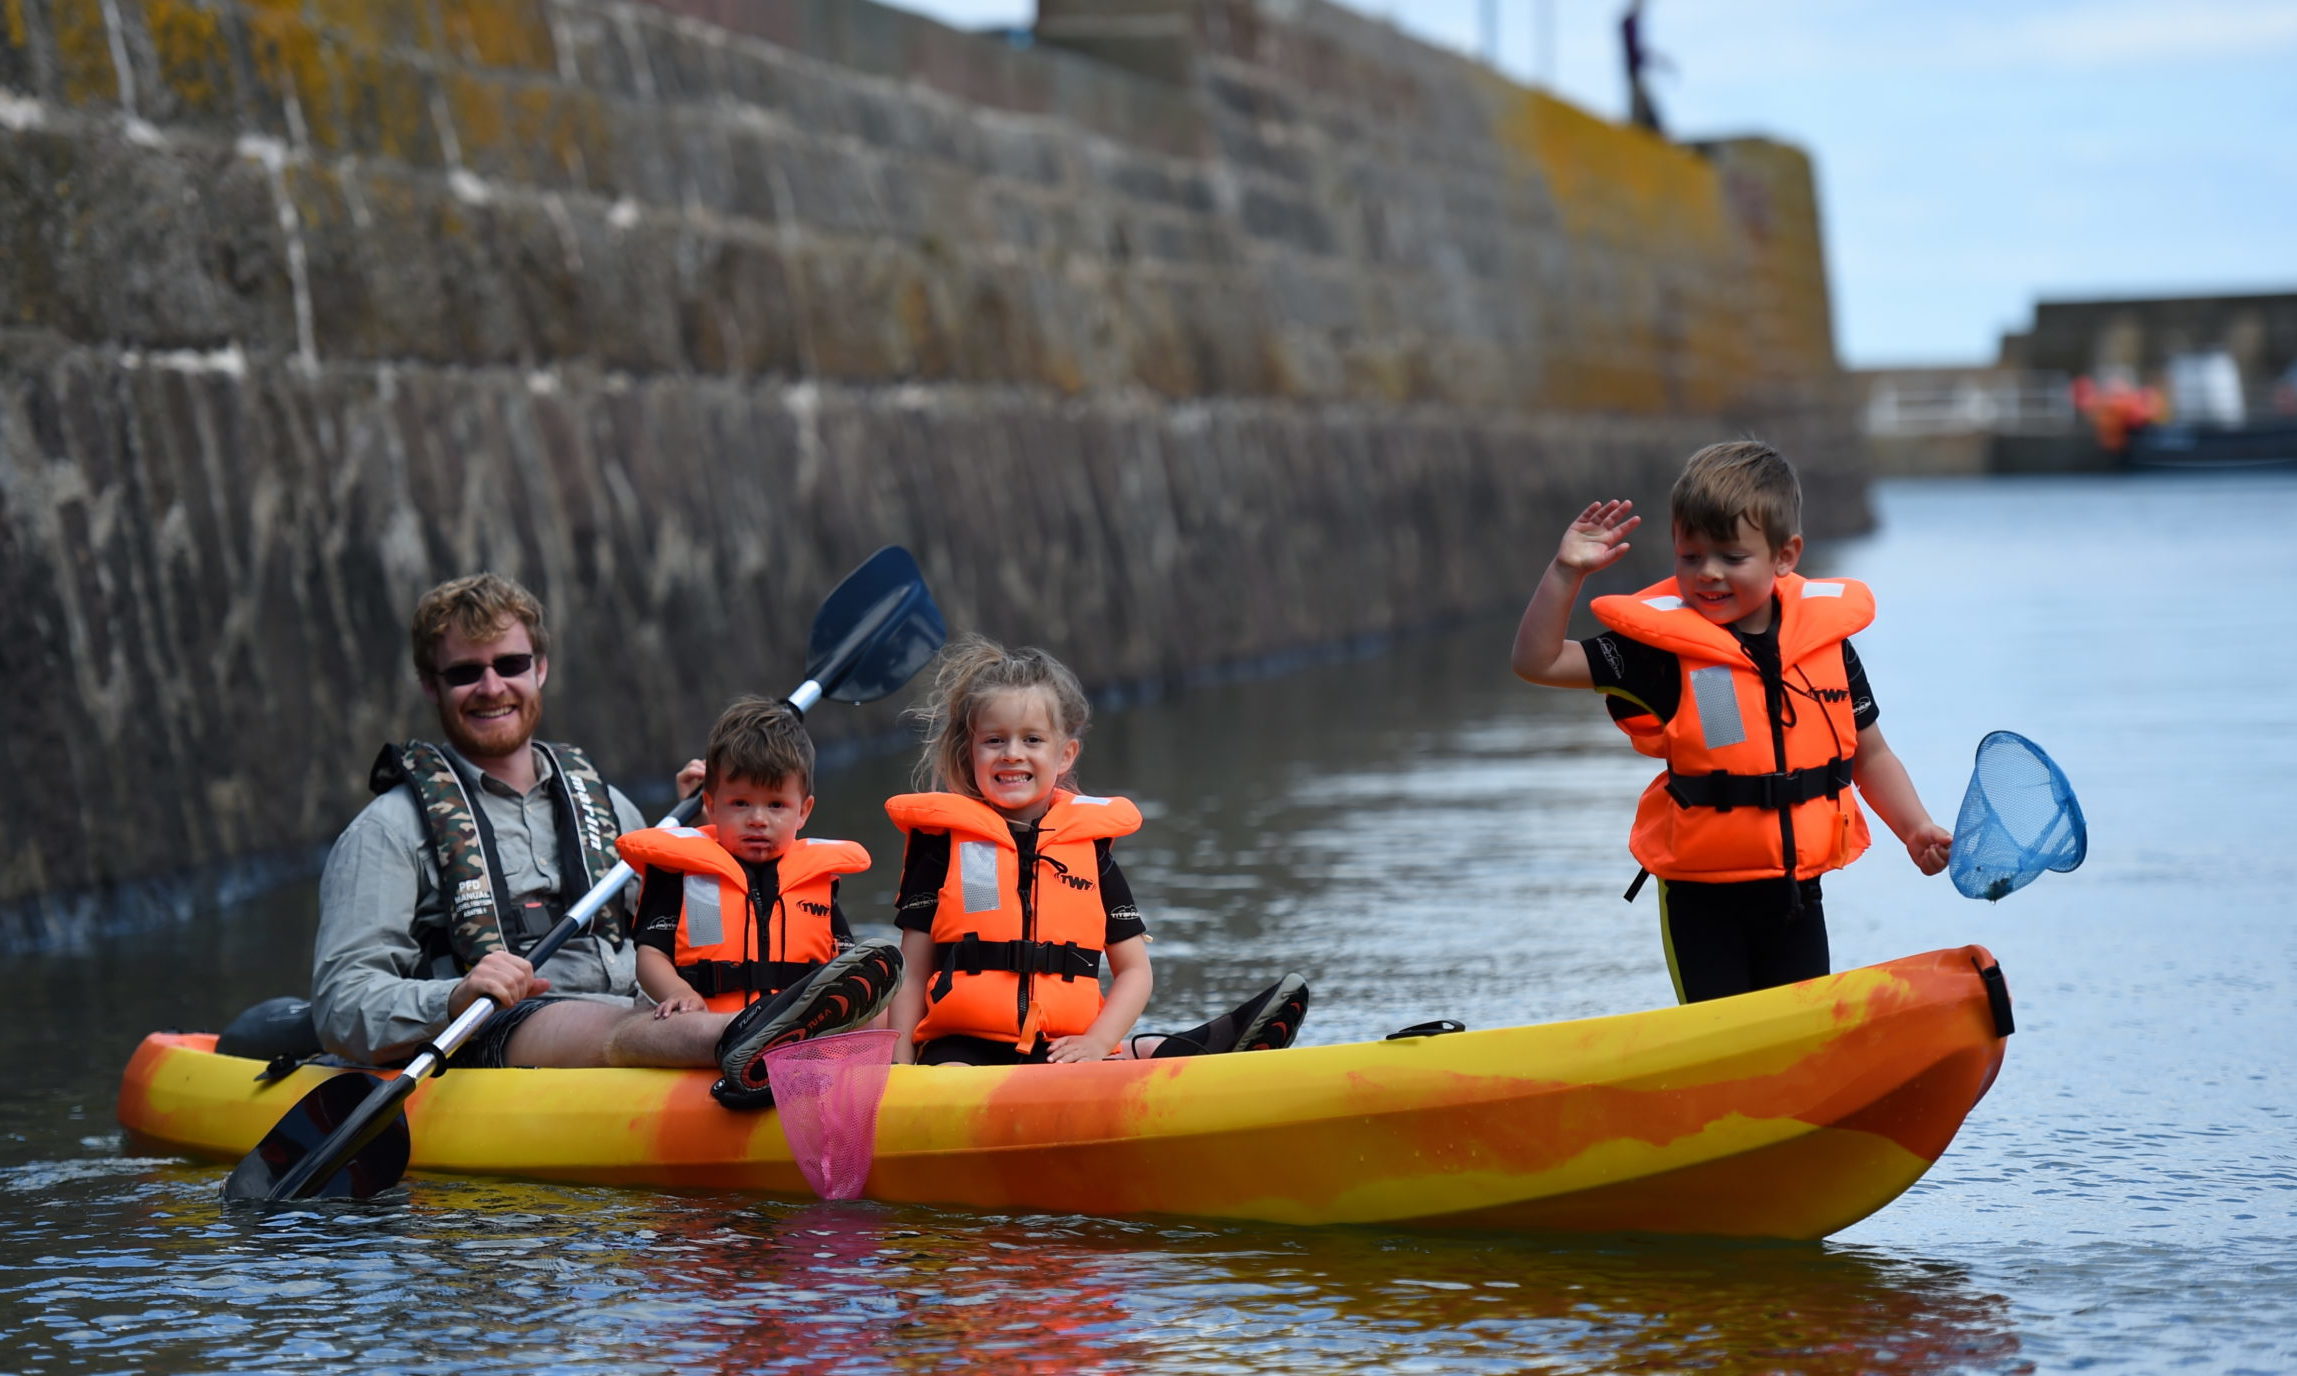 The Bottomley  family  'crabbing' from their canoe in Stonehaven harbour 

Picture by Paul Glendell